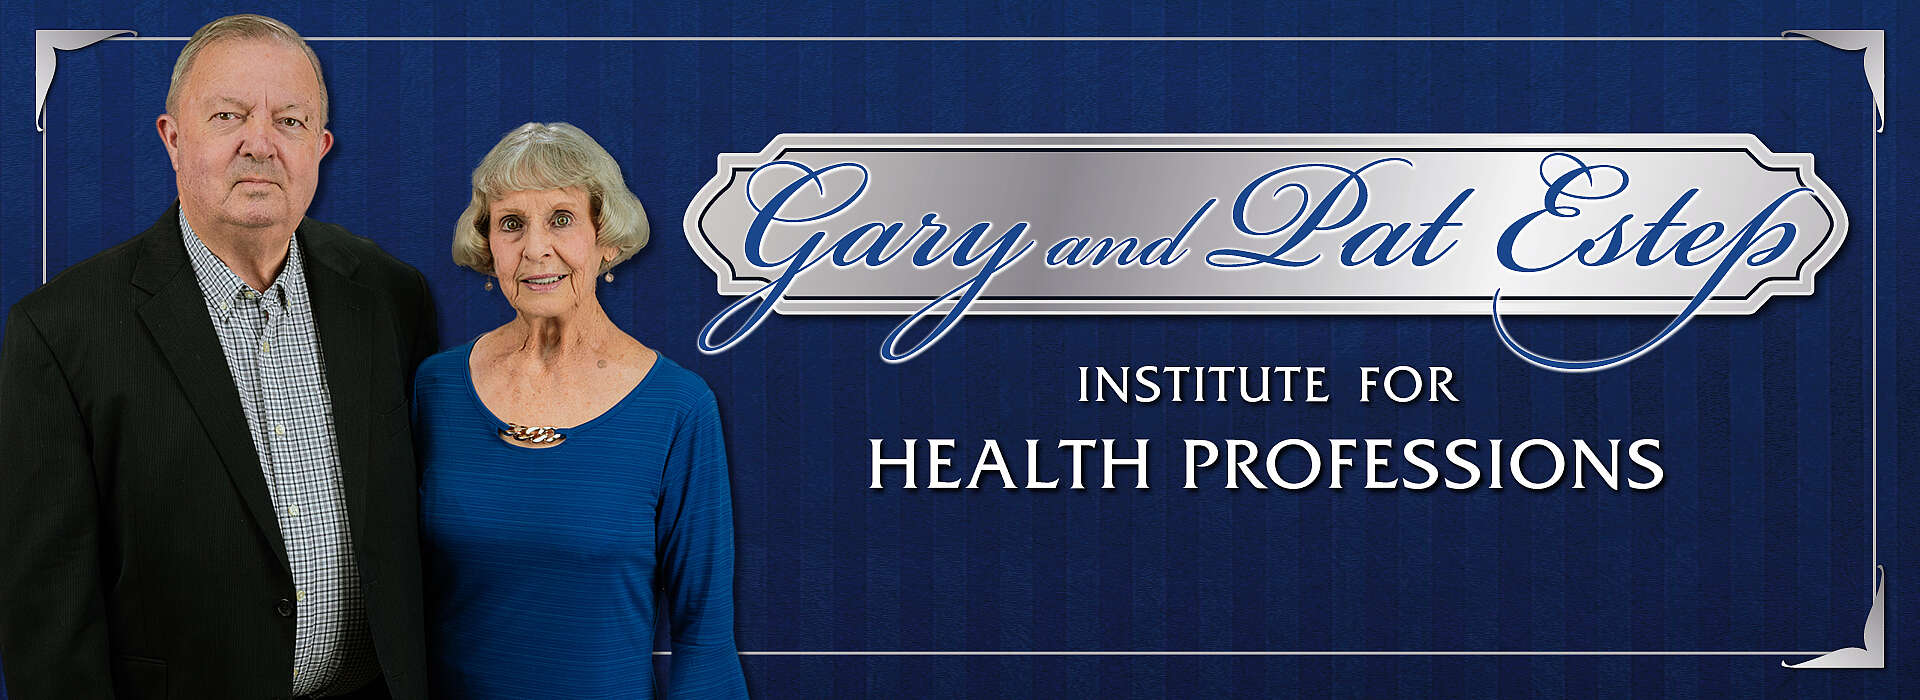 banner for Gary and Pat Estep Institute